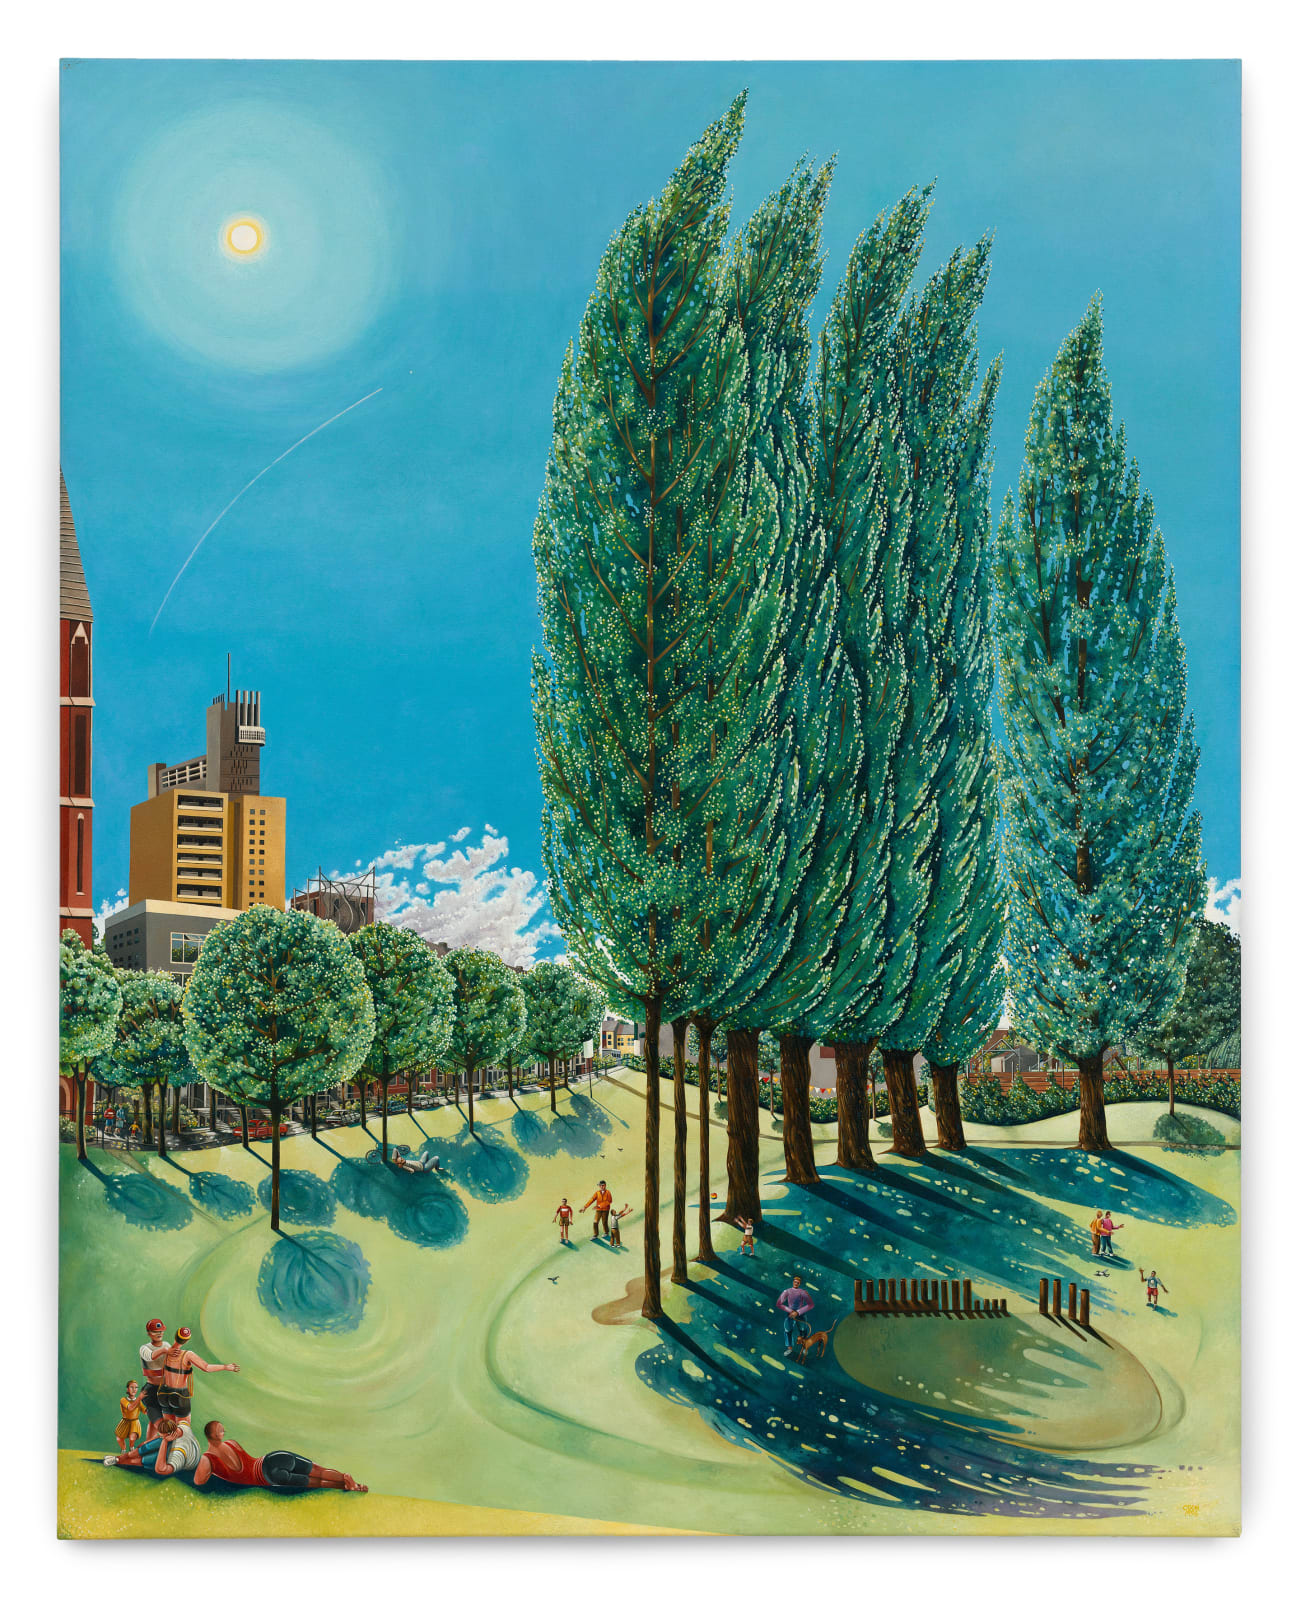 <div class="artist">Caroline Coon</div><div class="title_and_year"><span class="title">Horniman's Pleasance – Carnival Morning, August 24th 1996</span><span class="year">, 1996</span></div>